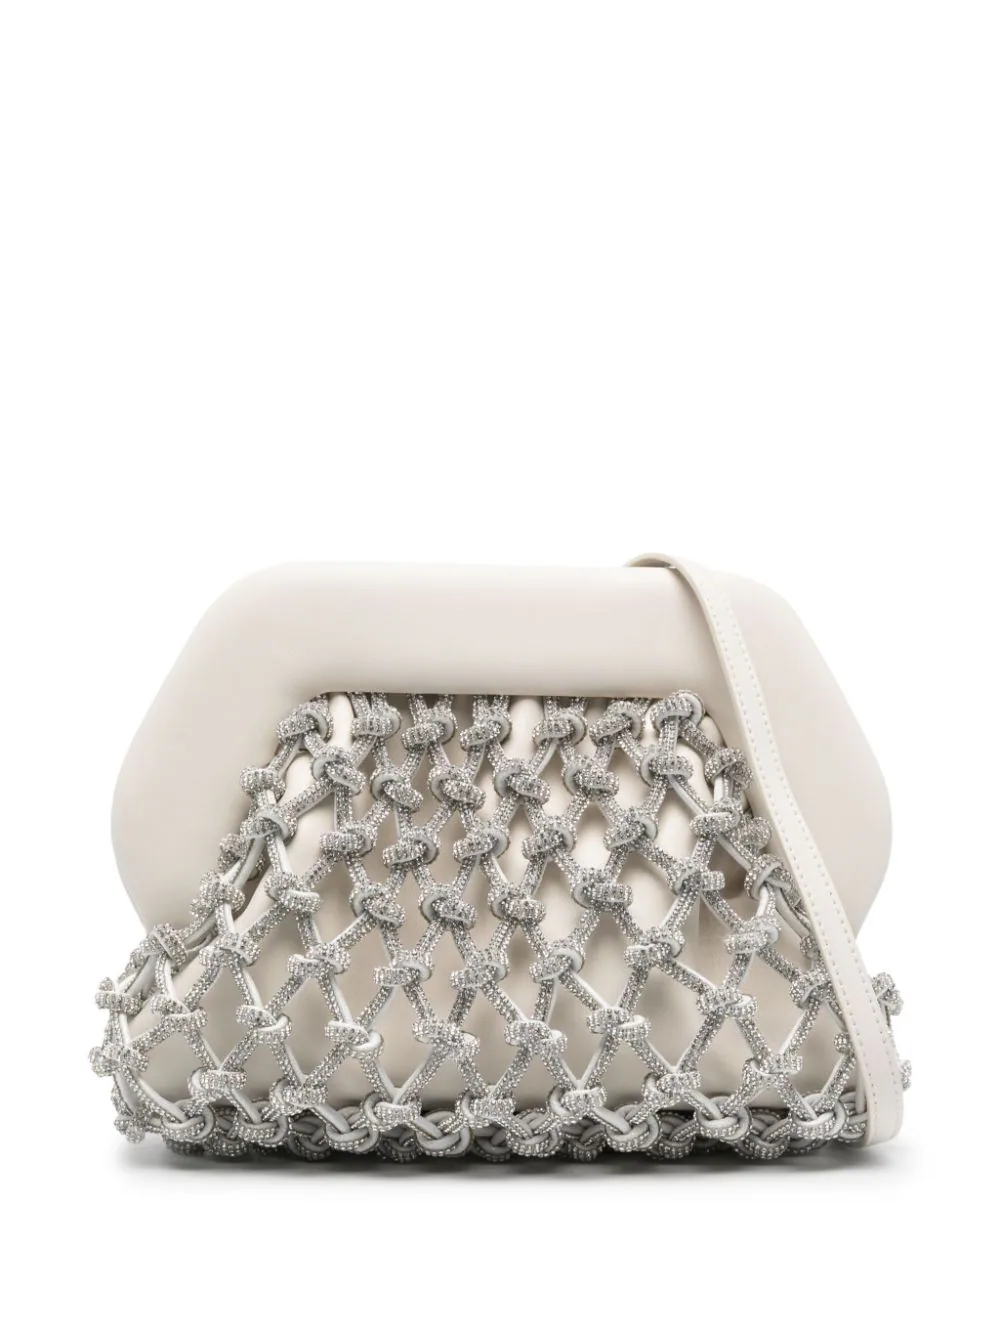 Themoire' Tia Knots Clutch Bag Embellished With Rhinestones In Metallic